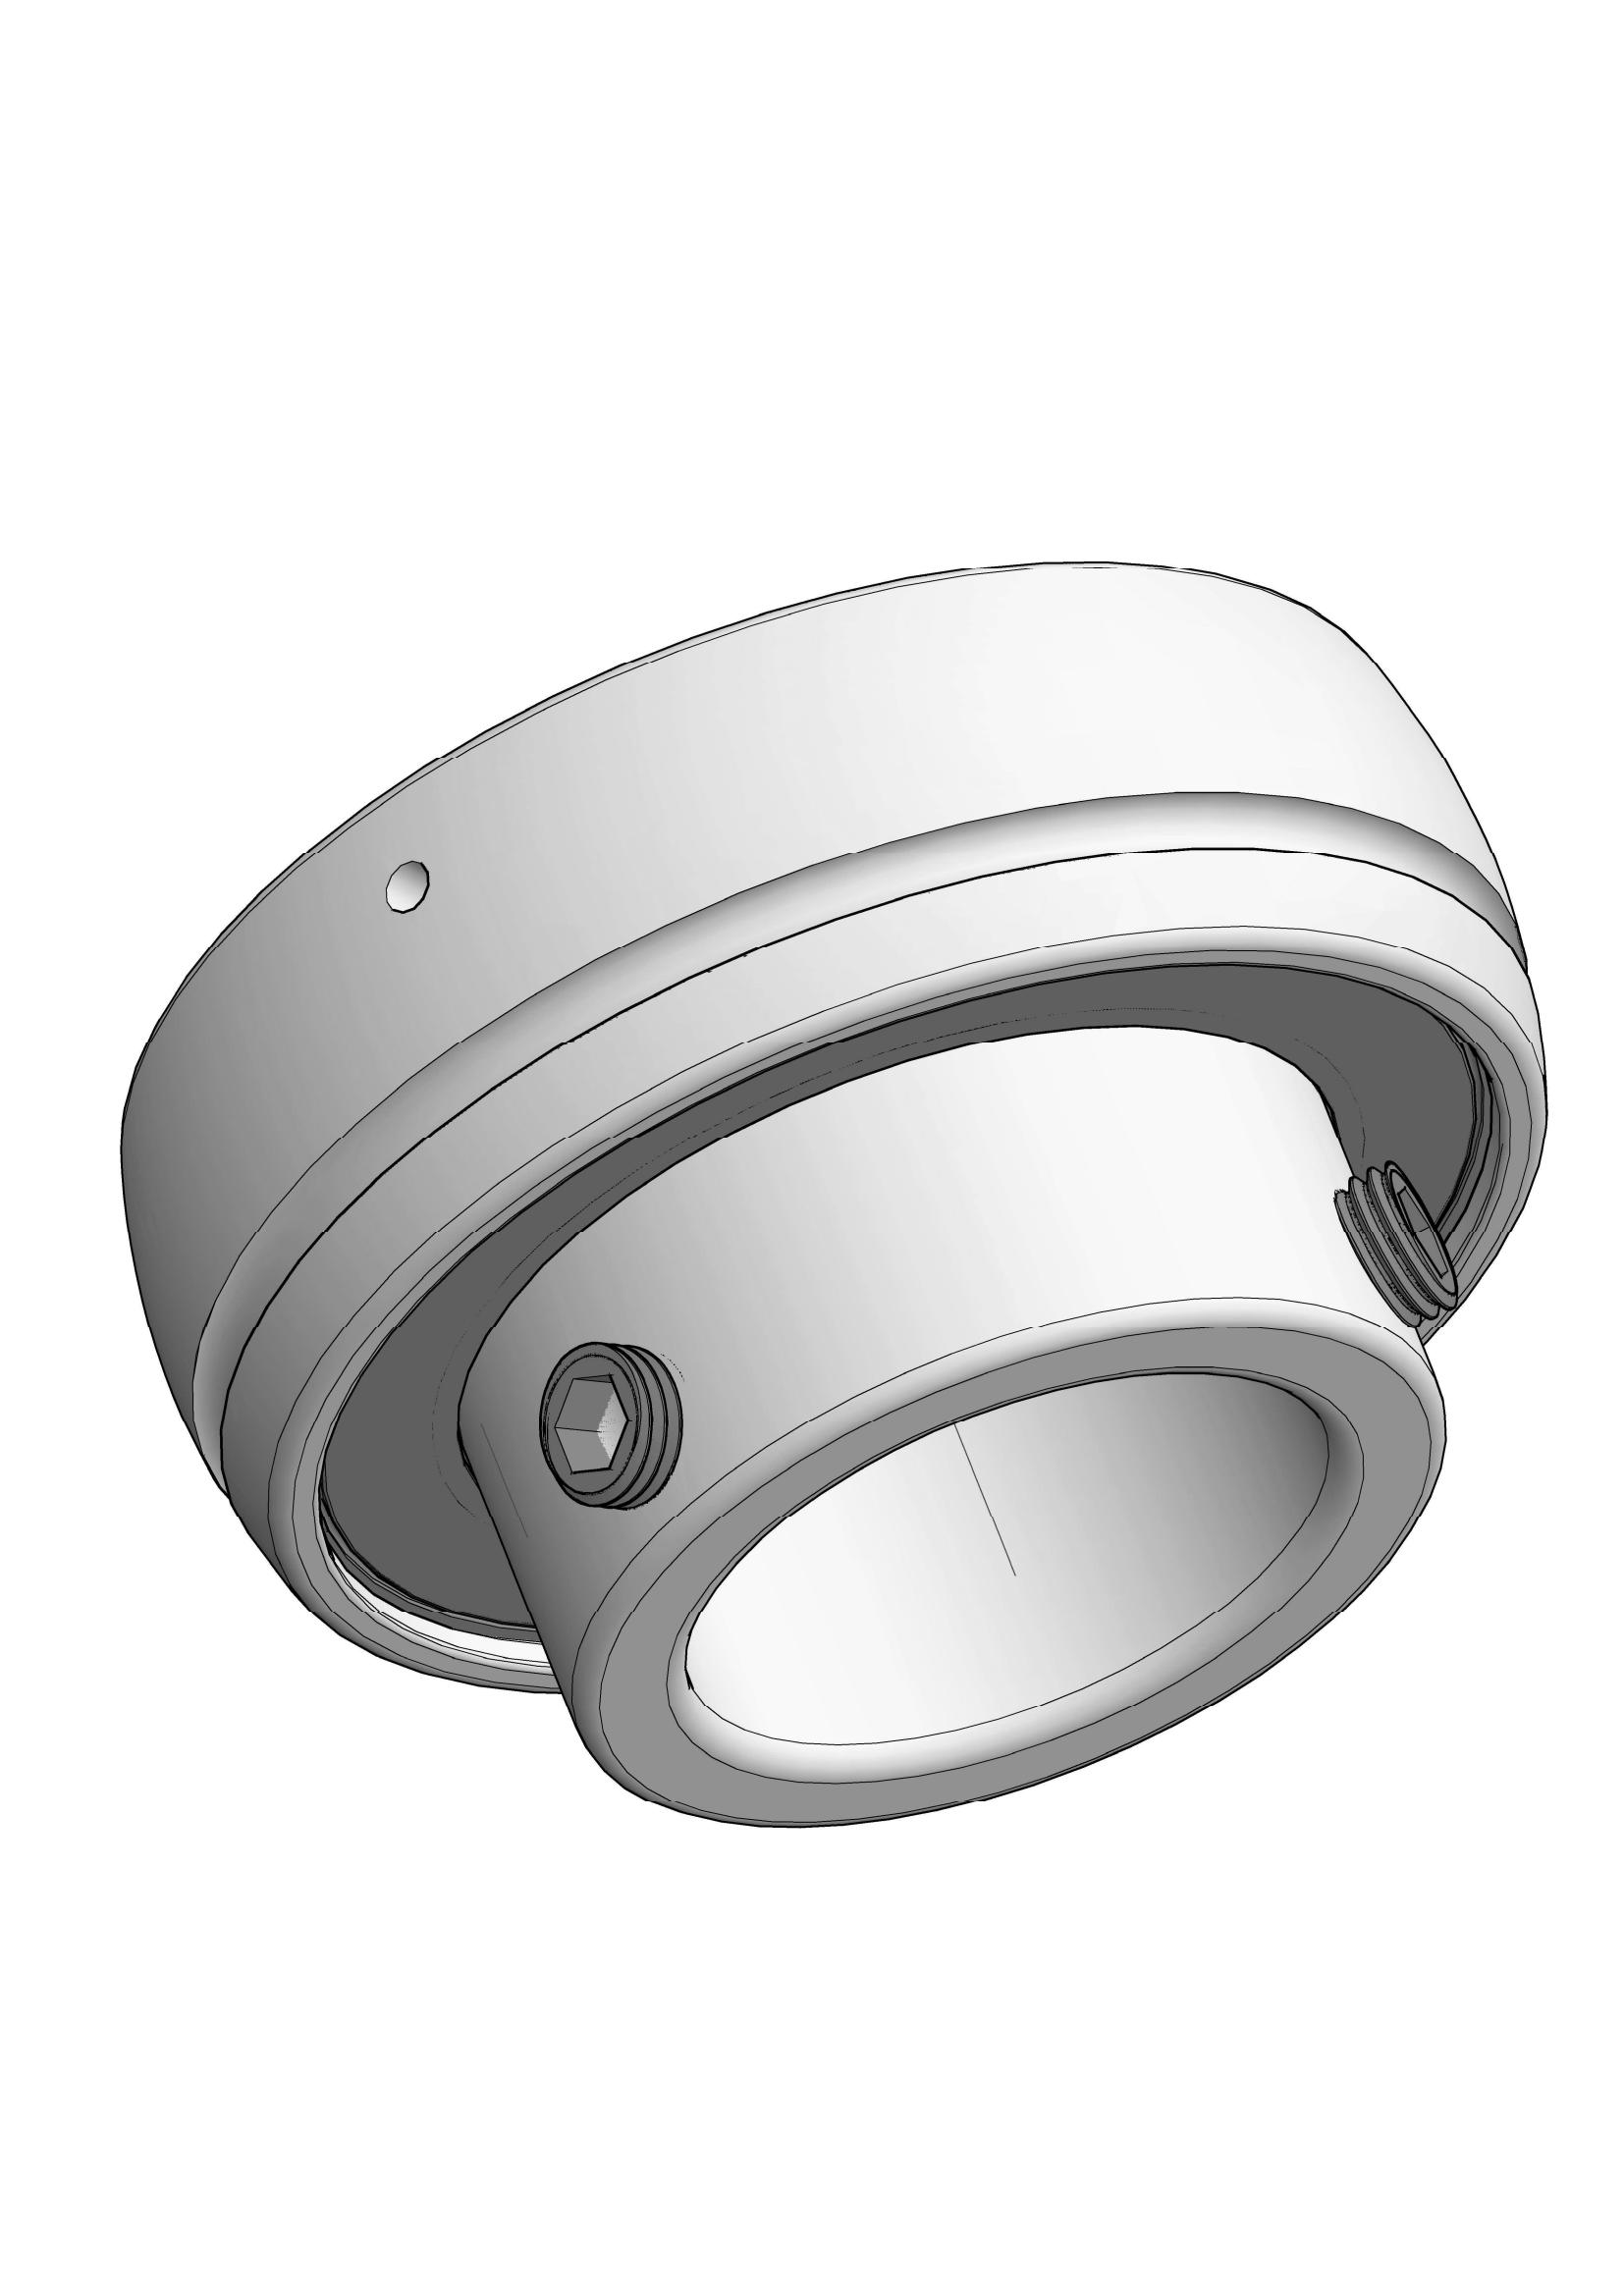 SB206-18 insert ball bearings with Eccentric Collar Lock with 1-1/8 inch Bore